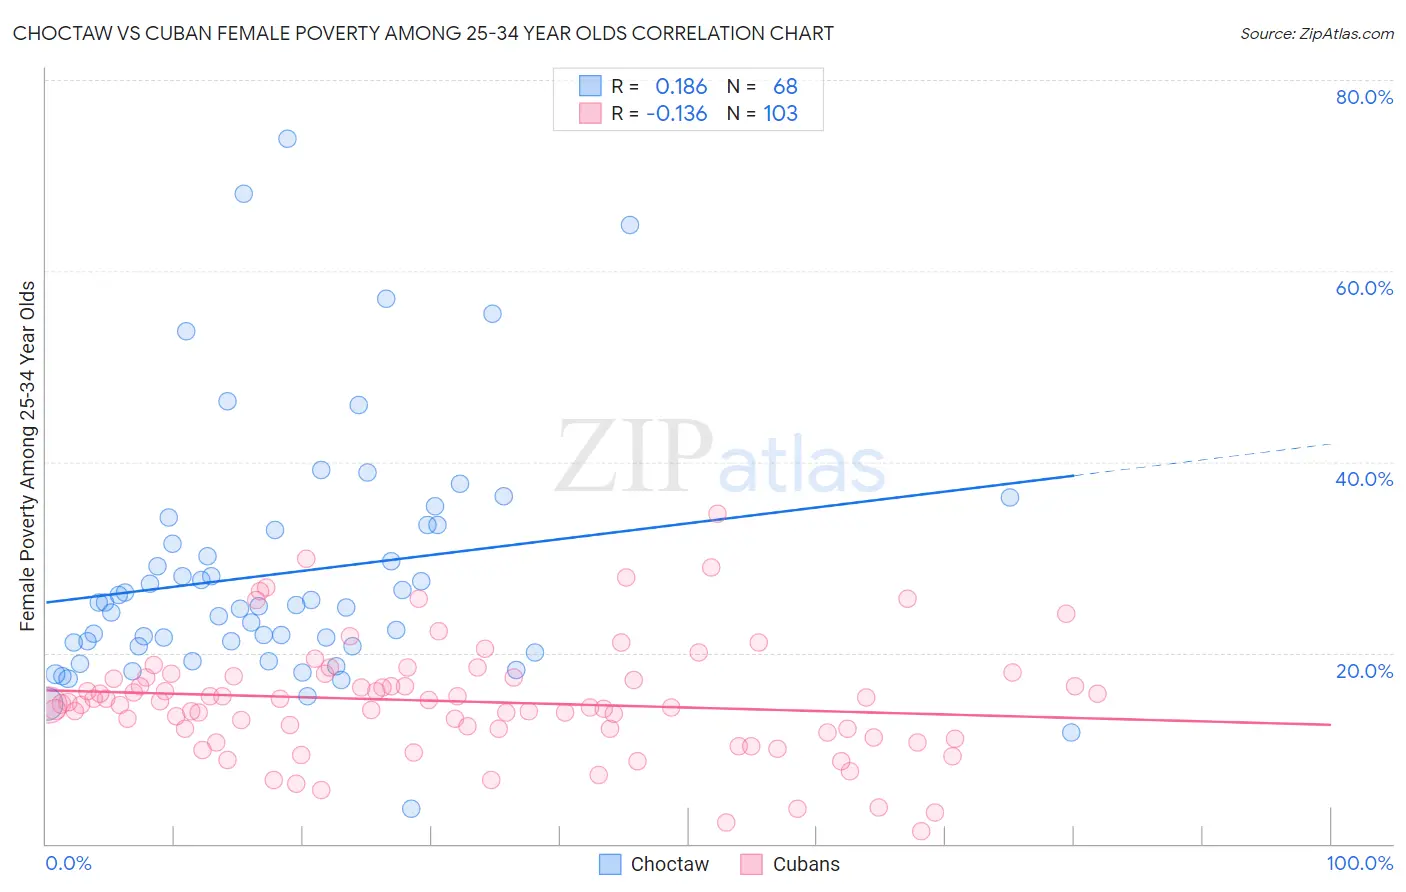 Choctaw vs Cuban Female Poverty Among 25-34 Year Olds